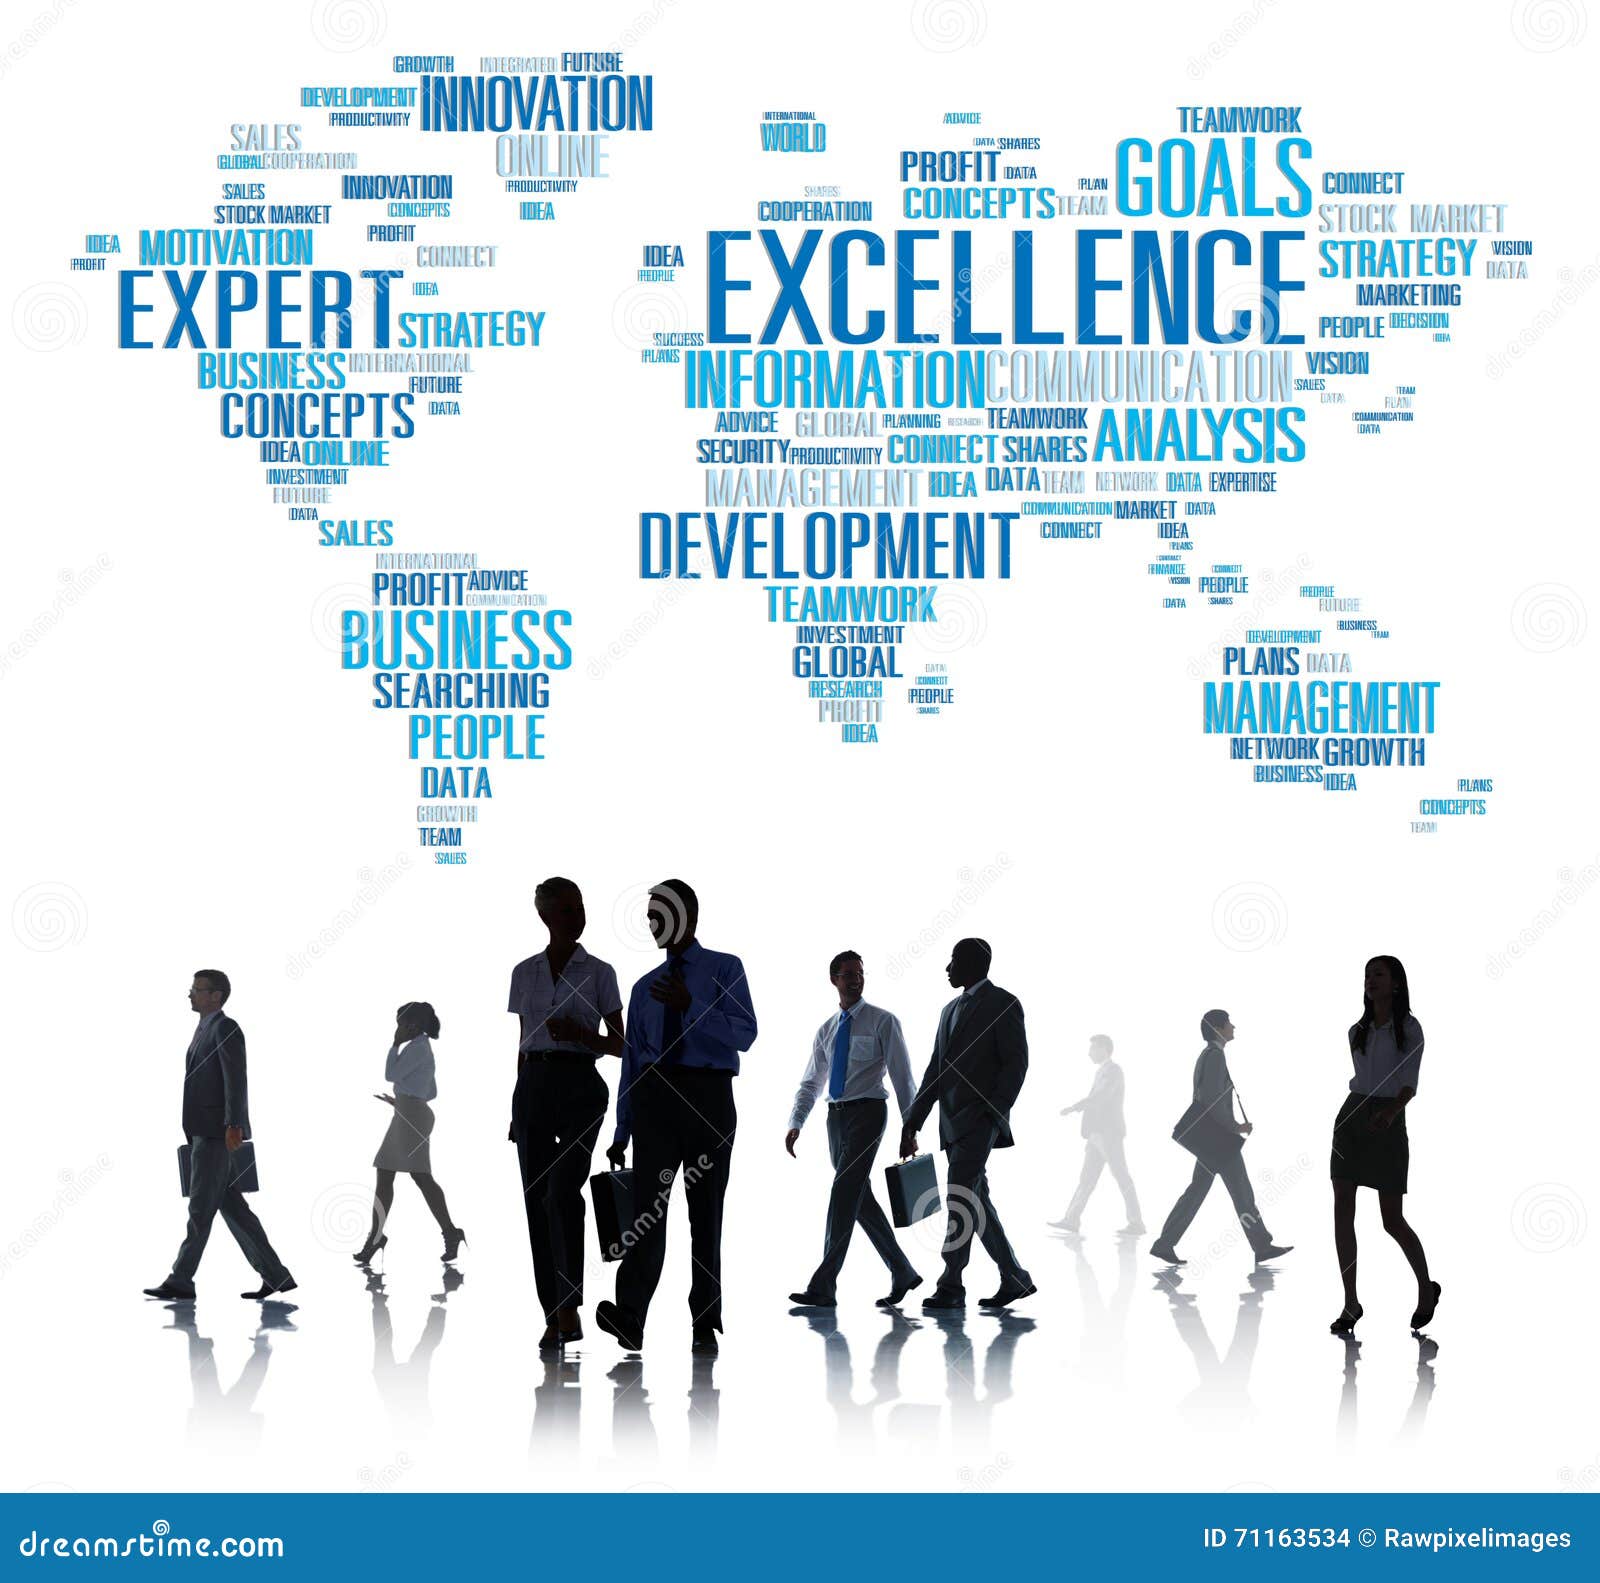 excellence expertise perfection global growth concept